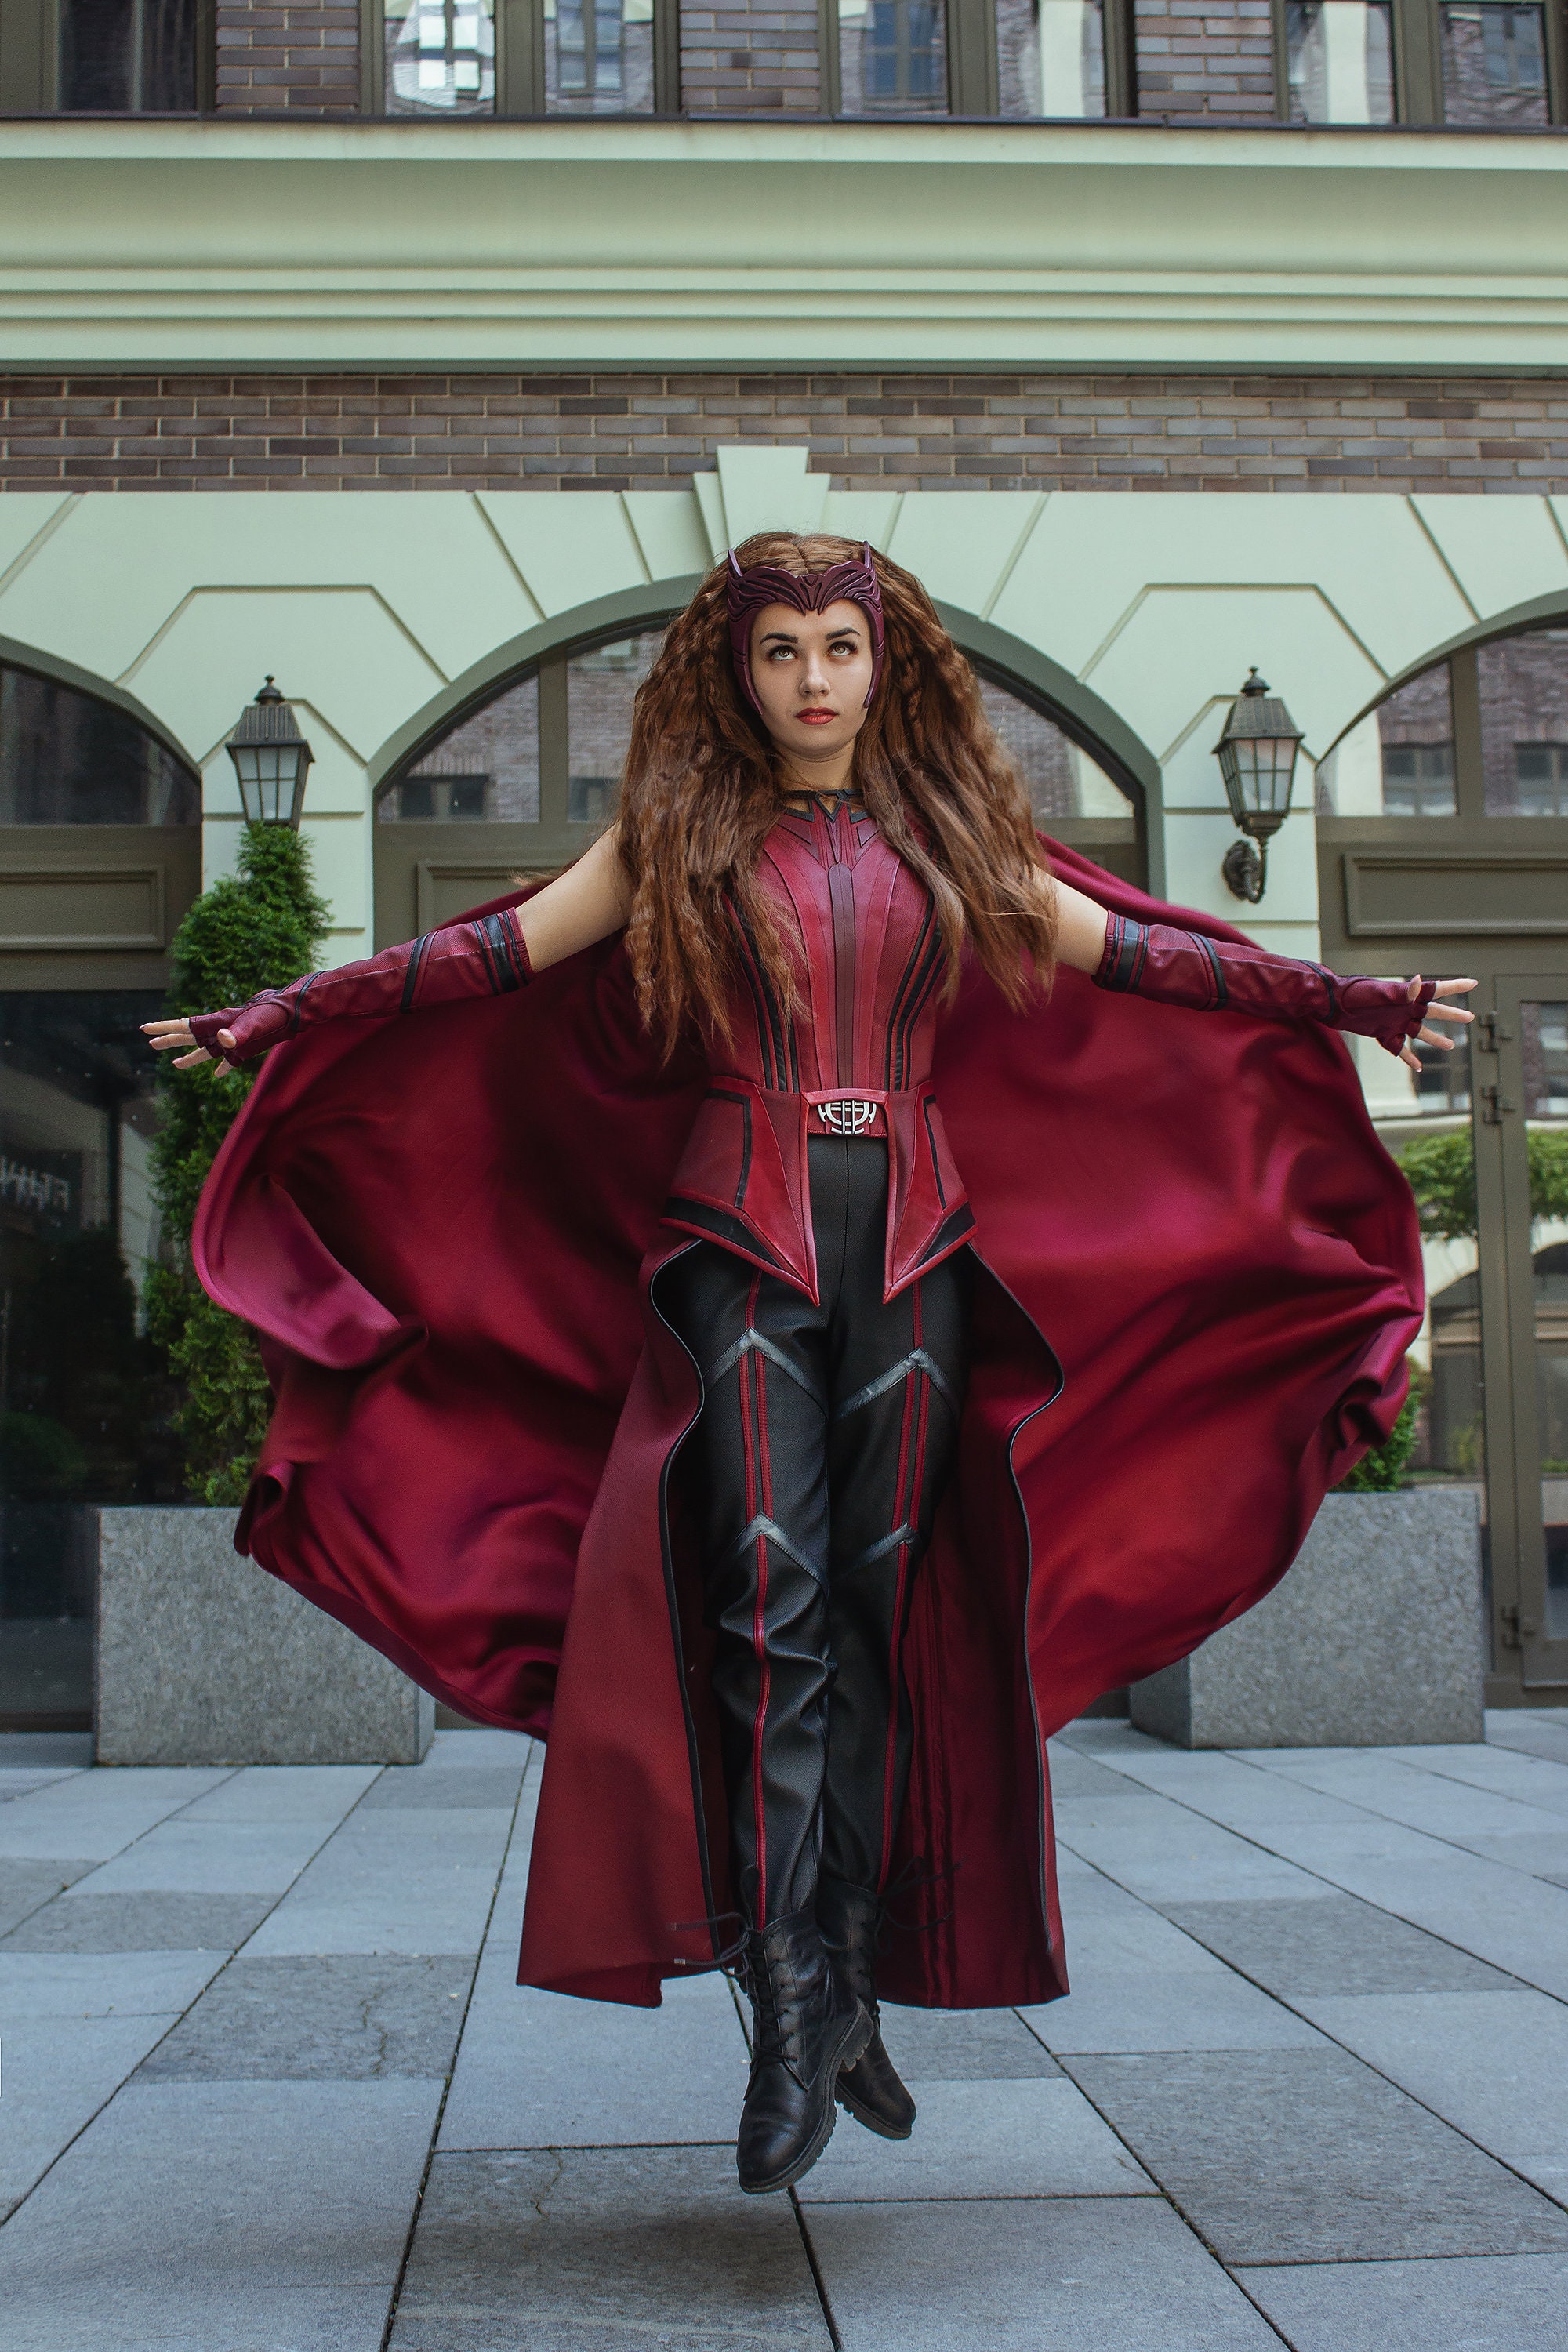 Buy Scarlet Witch Costume, Costume Witch Cosplay, Wanda Maximoff